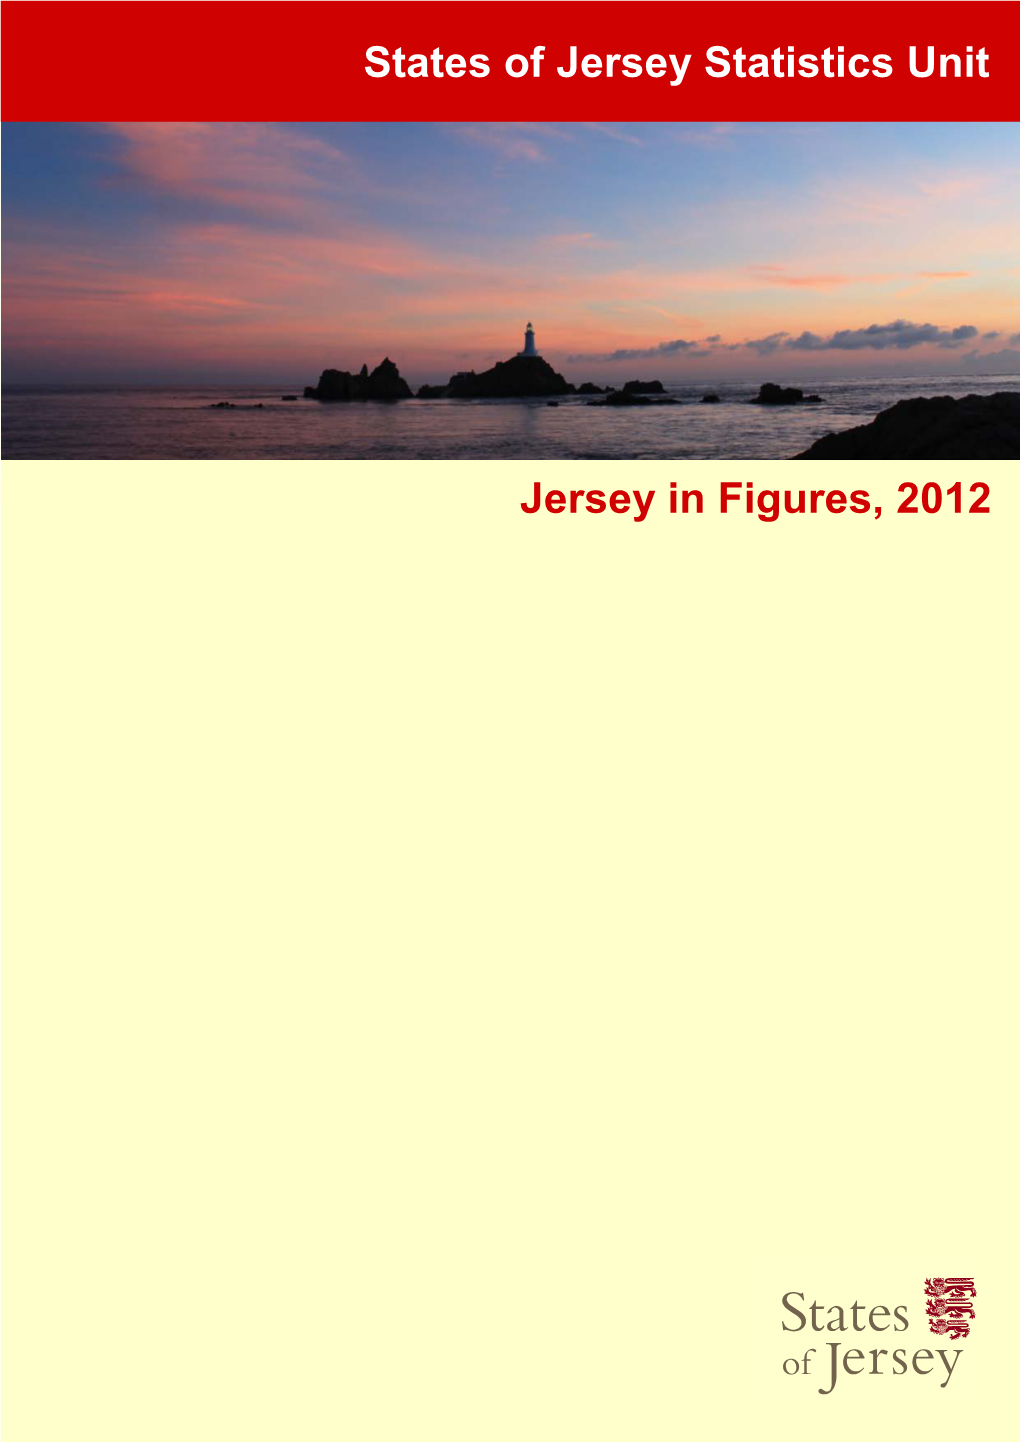 Jersey in Figures, 2012 States of Jersey Statistics Unit